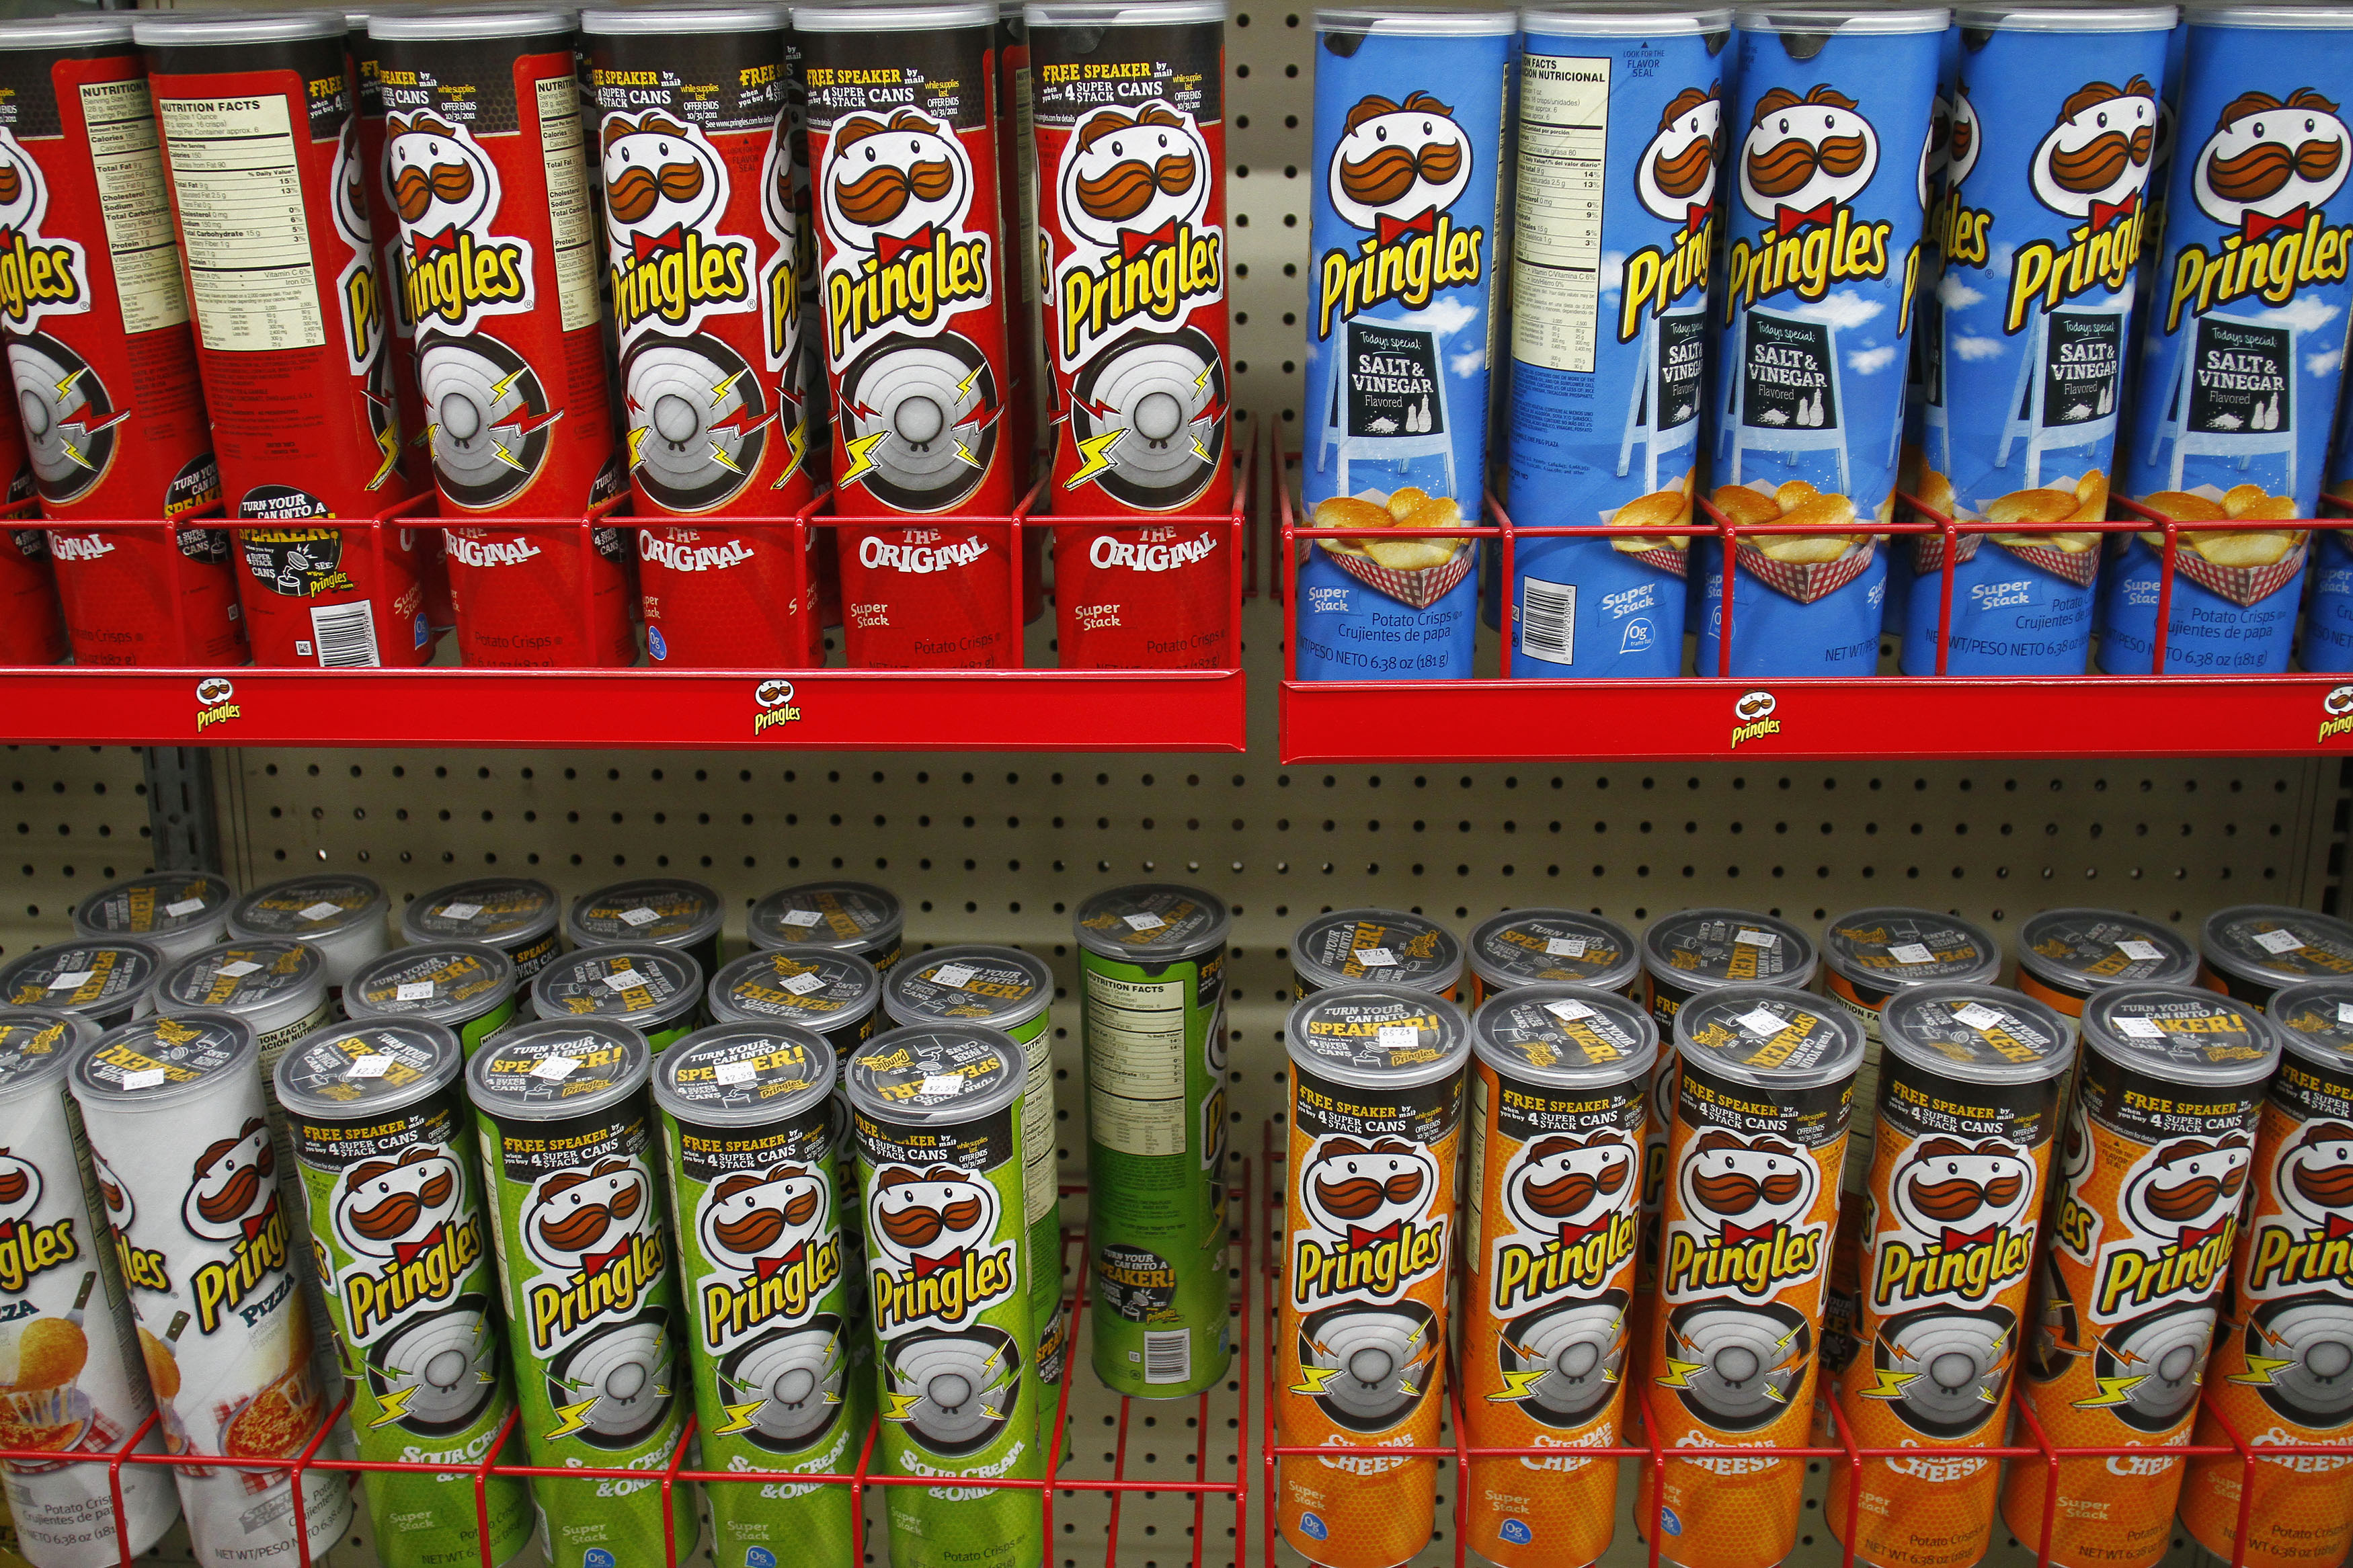 Containers of Pringles chips, a product of Procter & Gamble, are displayed at a gas station in Phoenix